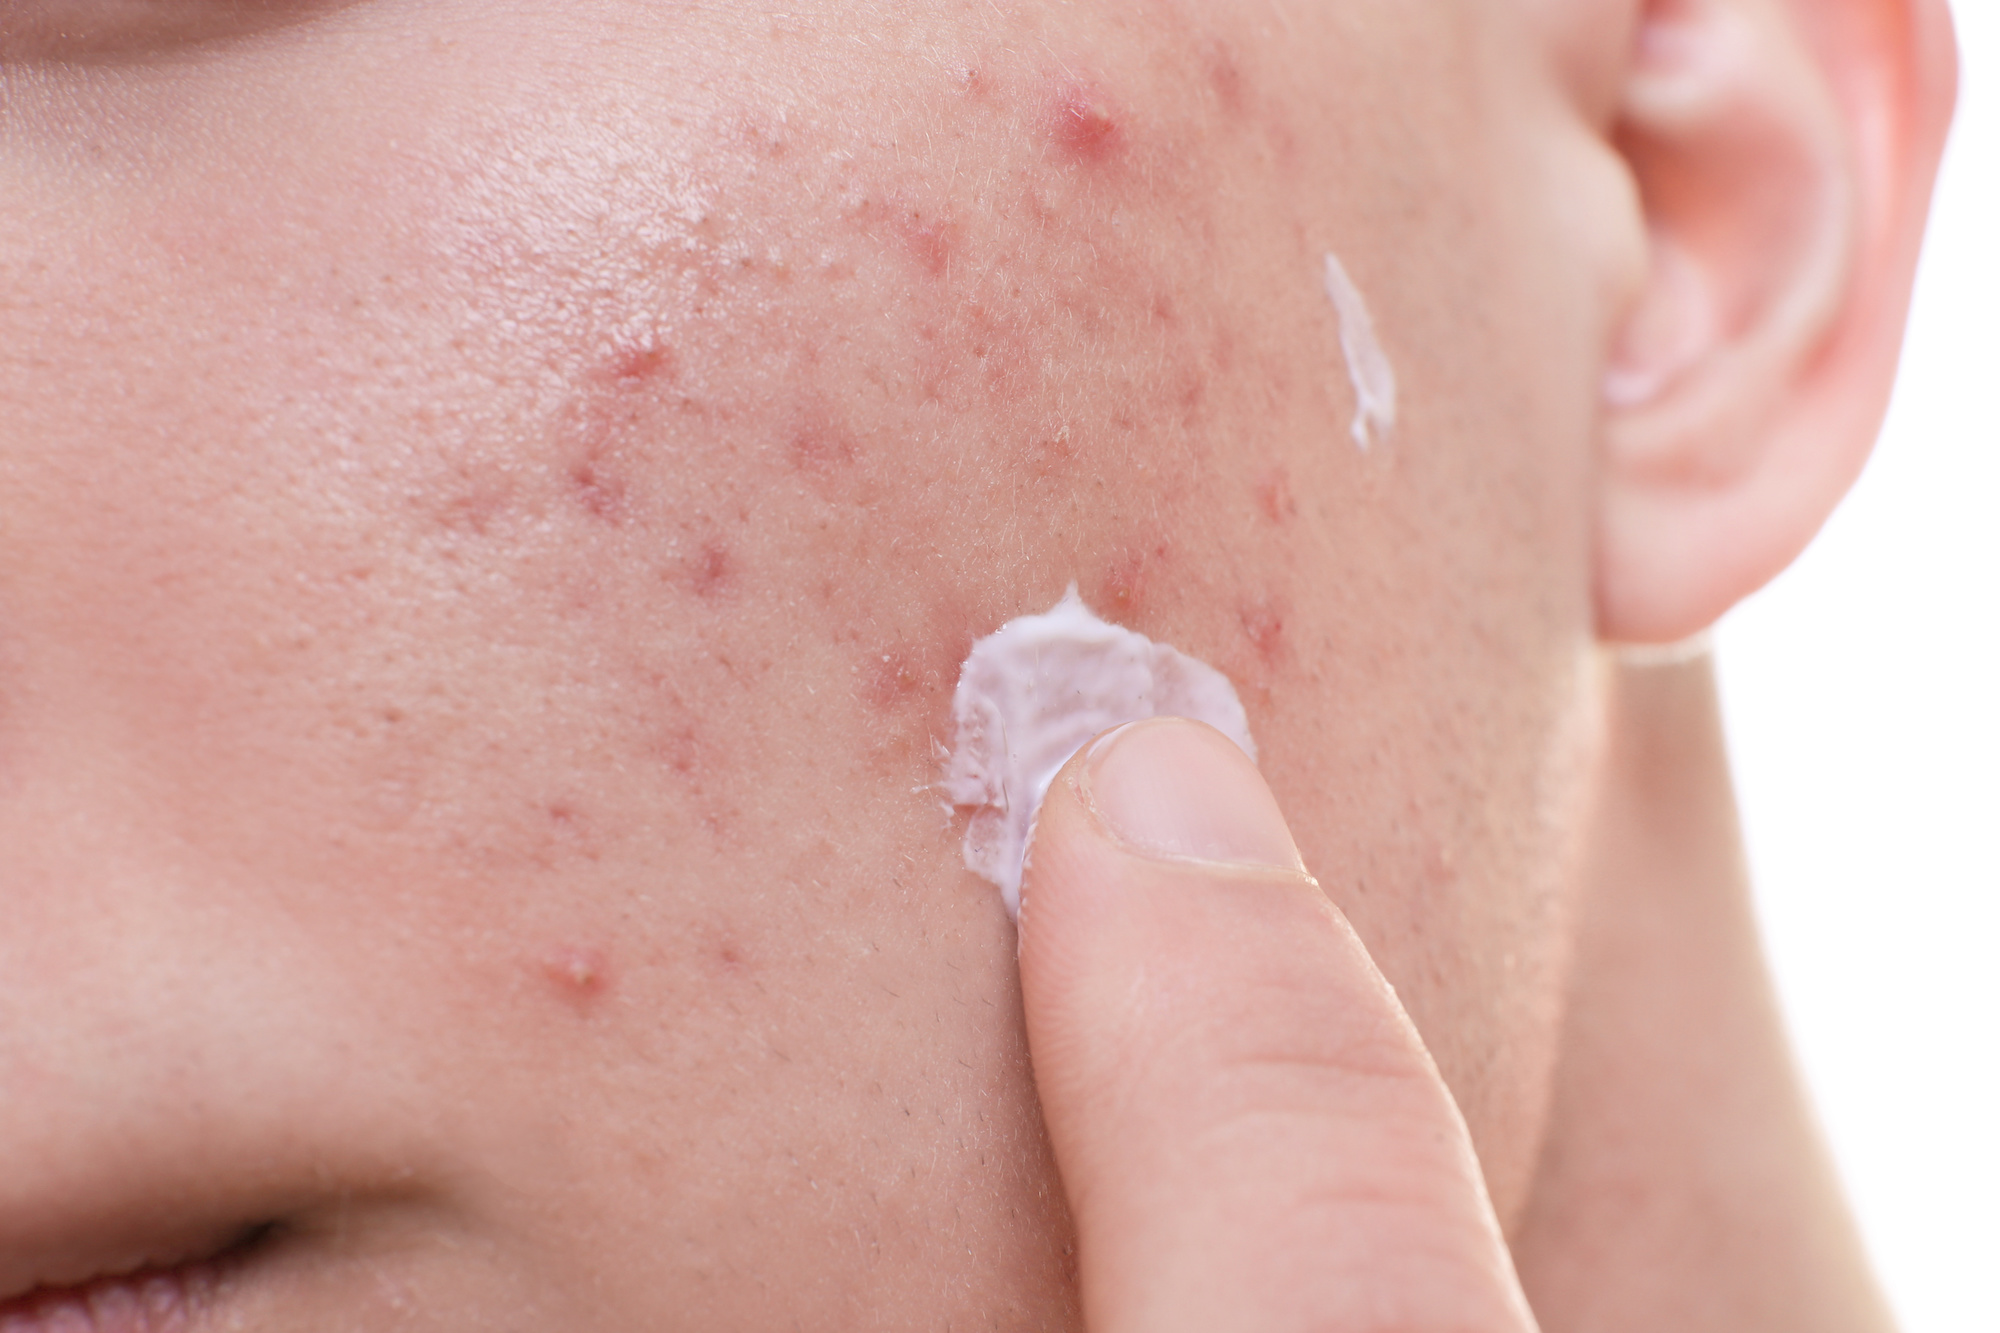 What You Need To Know Before Using Topical Antibiotics To Treat Your Acne